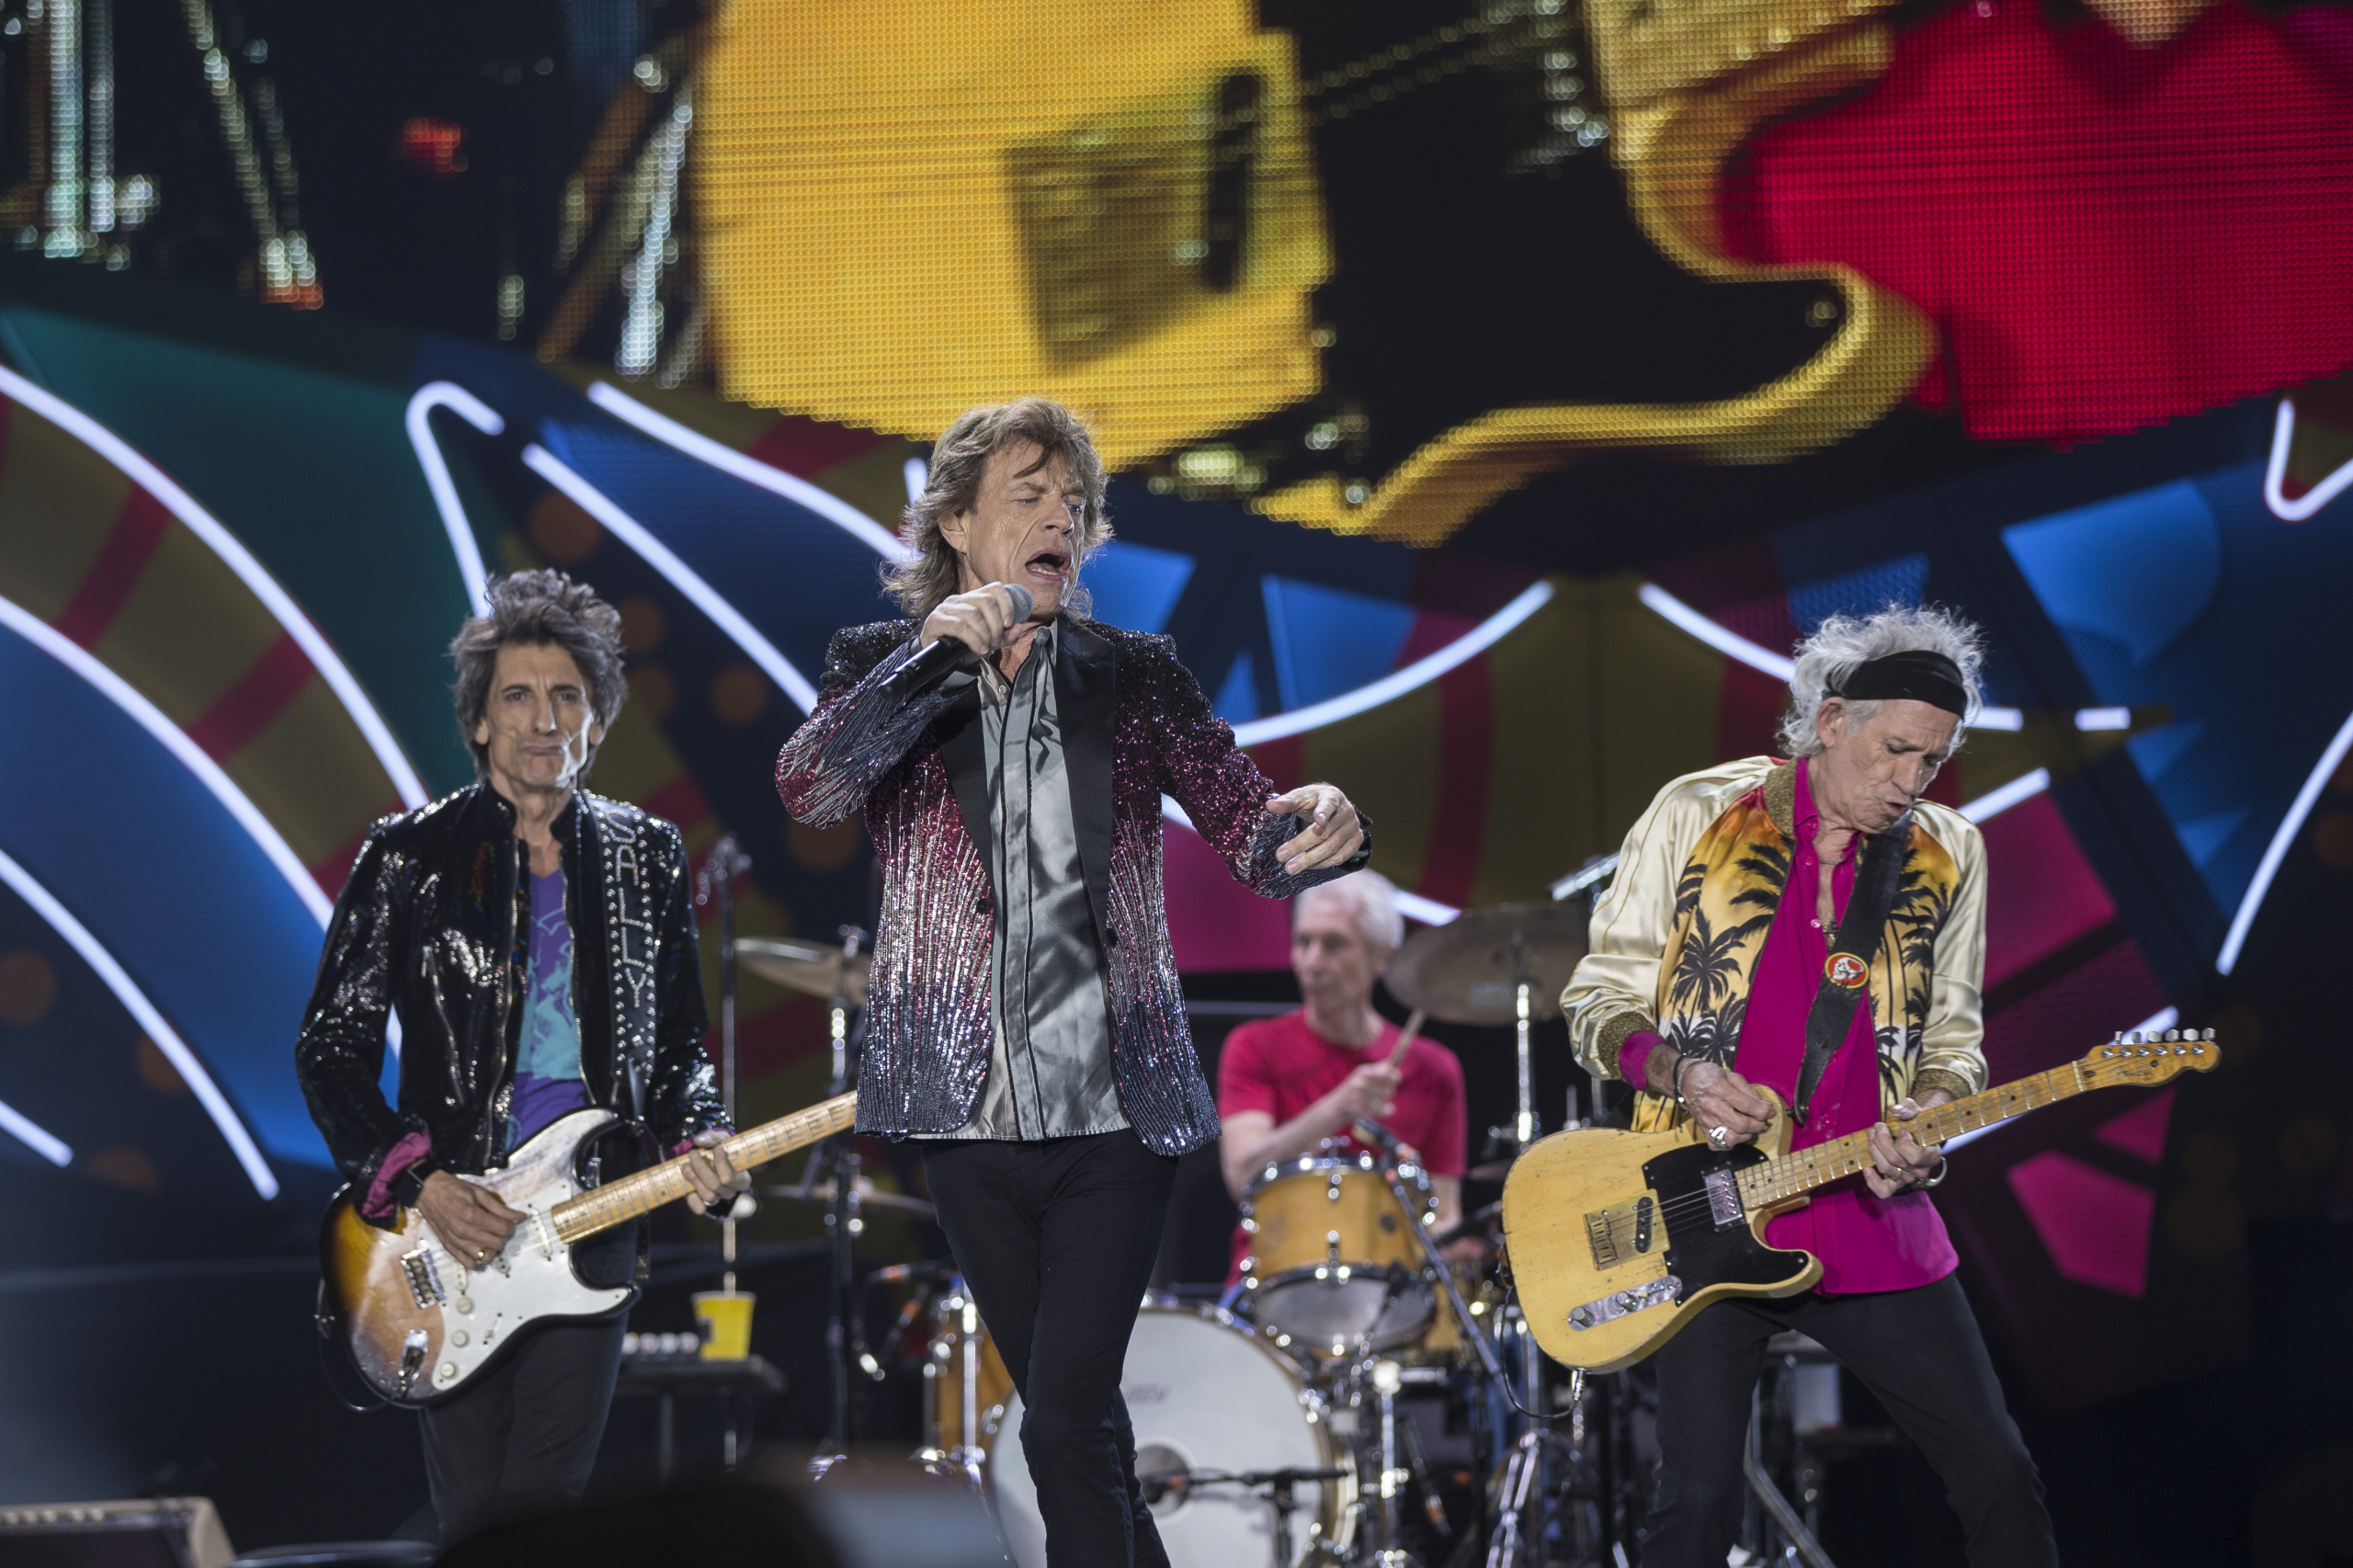 The Rolling Stones are releasing a new album, their first in 18 years